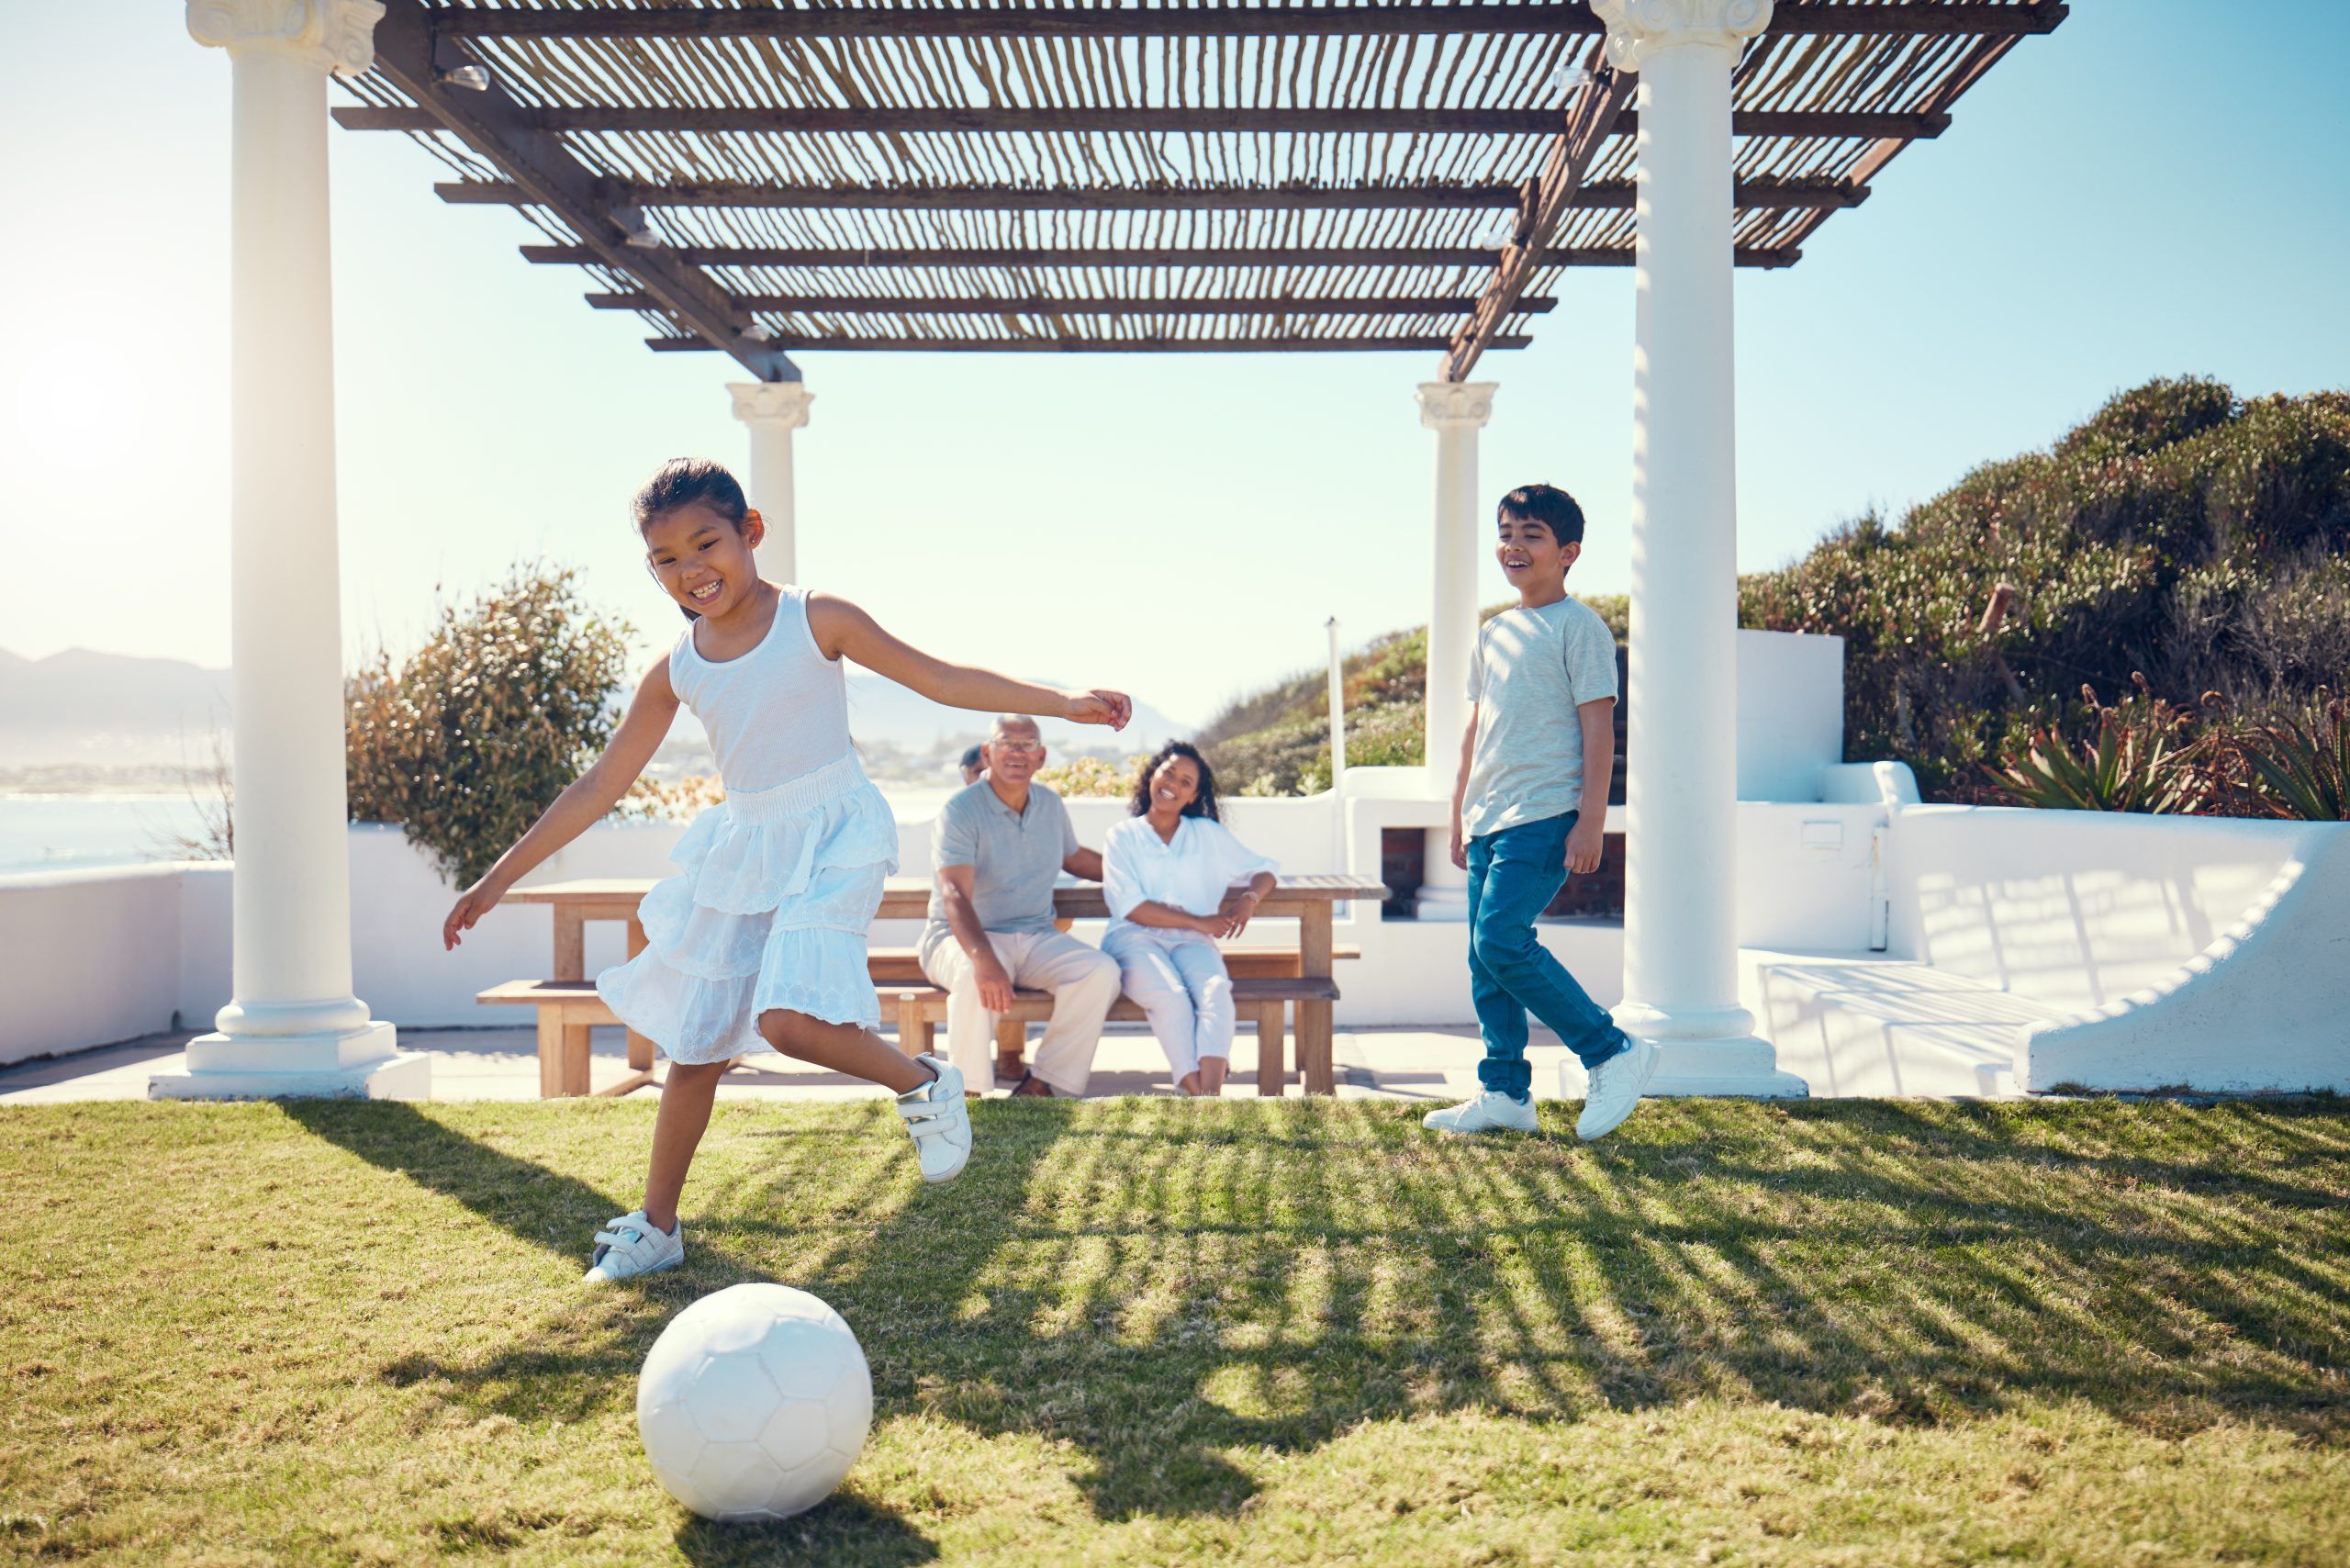 Family Vacation And Children Playing Soccer On